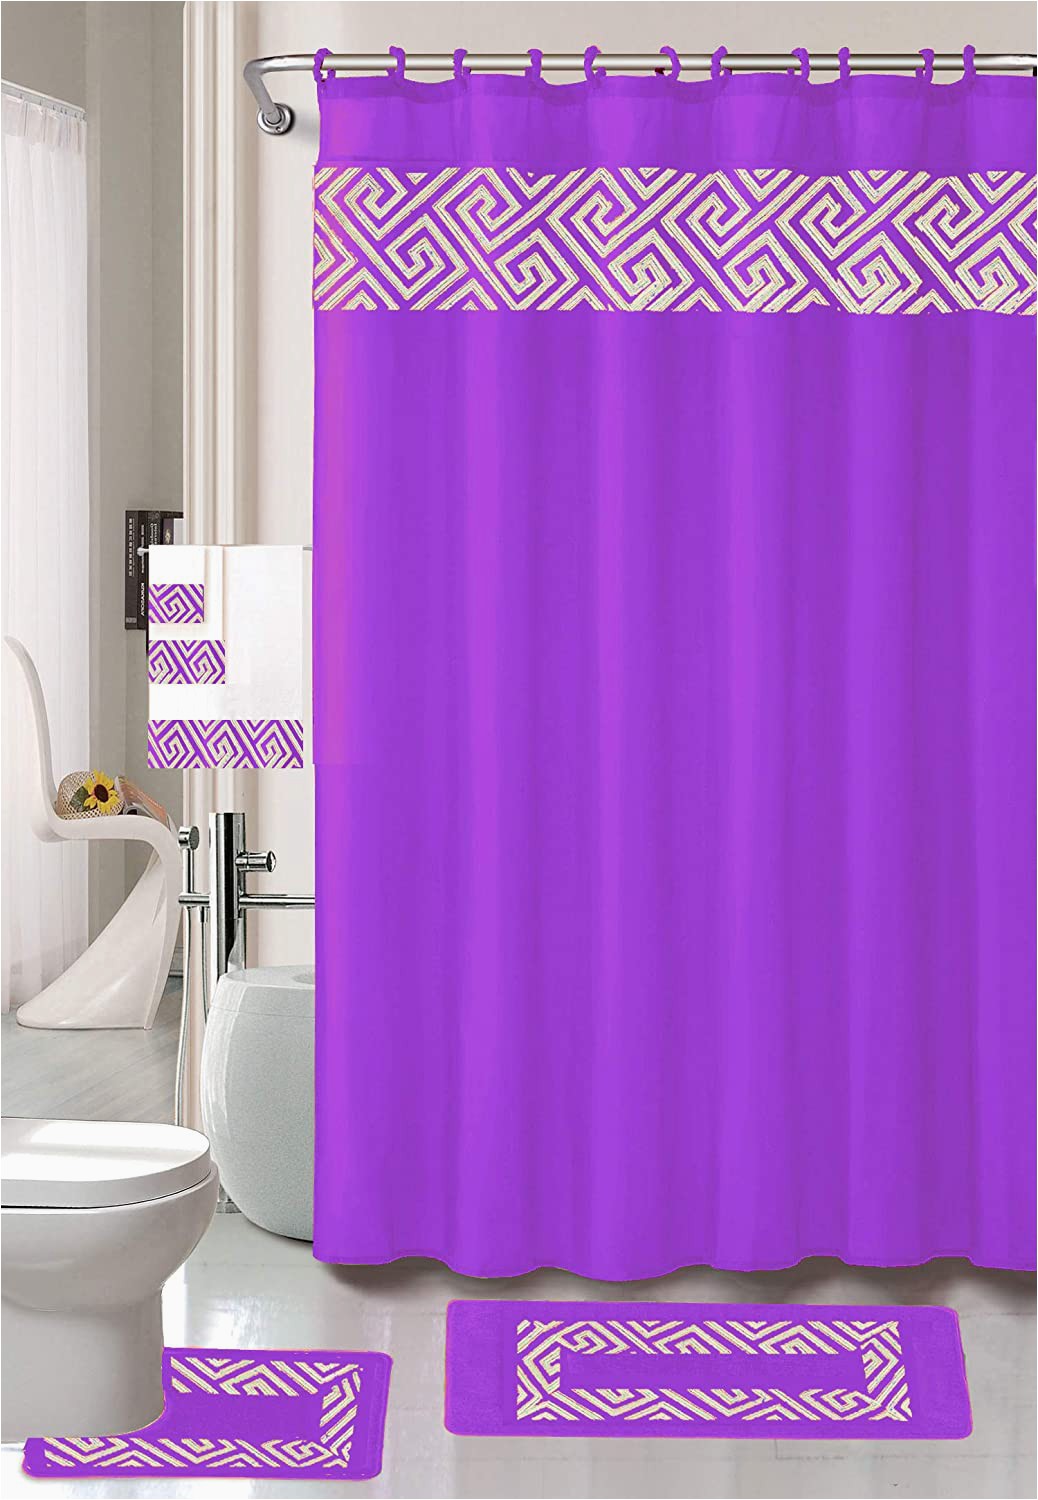 Purple Bathroom Rugs and towels Luxury Home Collection 18 Piece Embroidery Non Slip Bathroom Rug Set Set Includes Bath Rug Mat Contour Mat Shower Curtain towels and Hooks